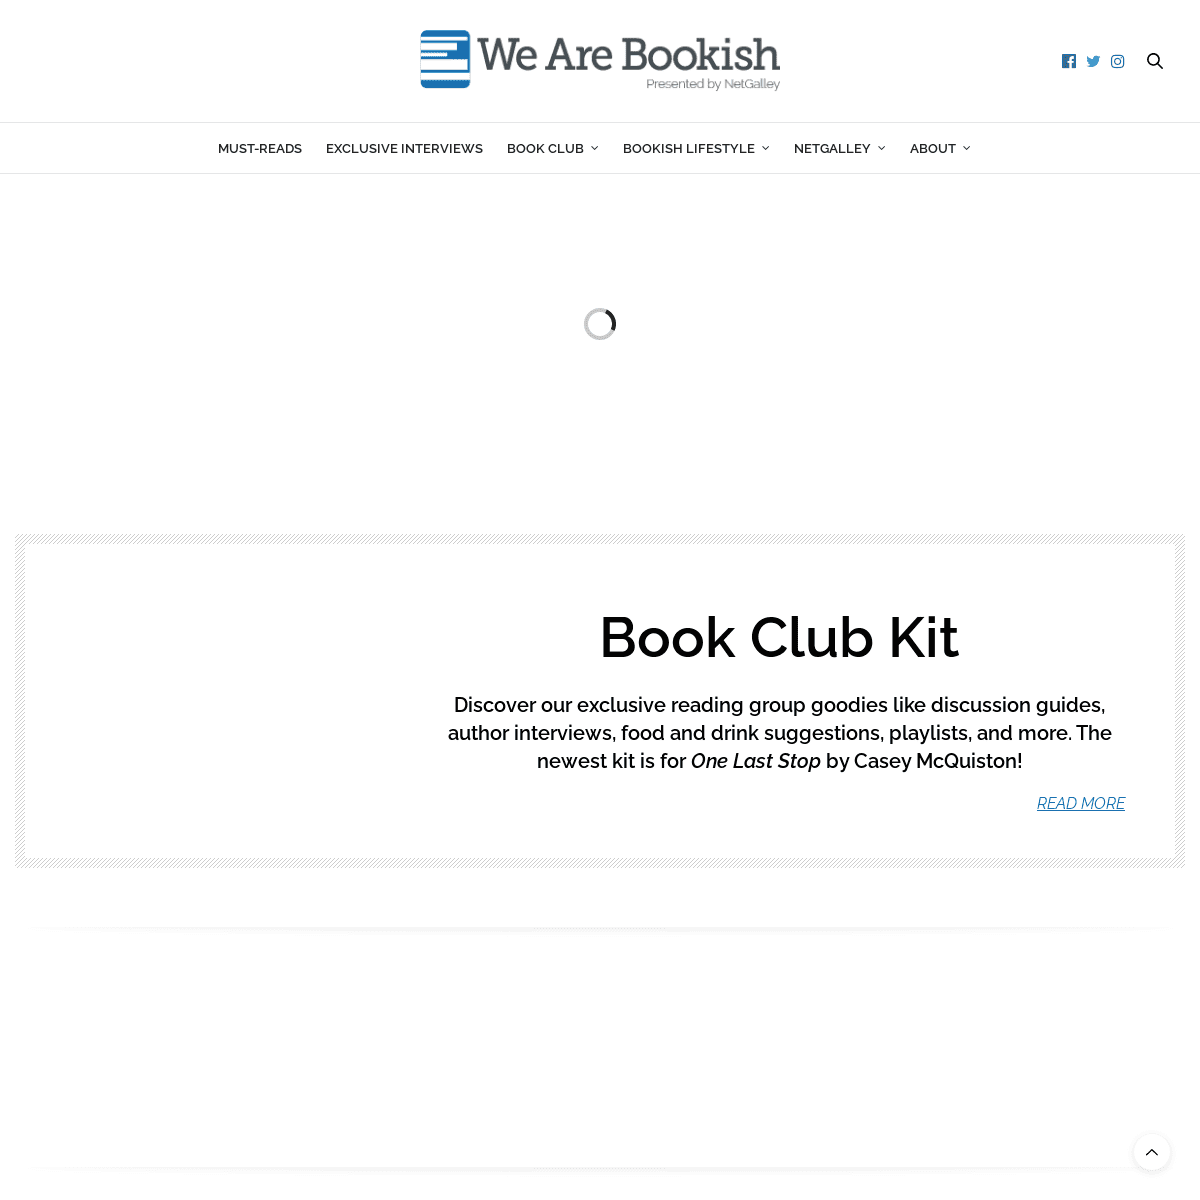 A complete backup of https://bookish.com